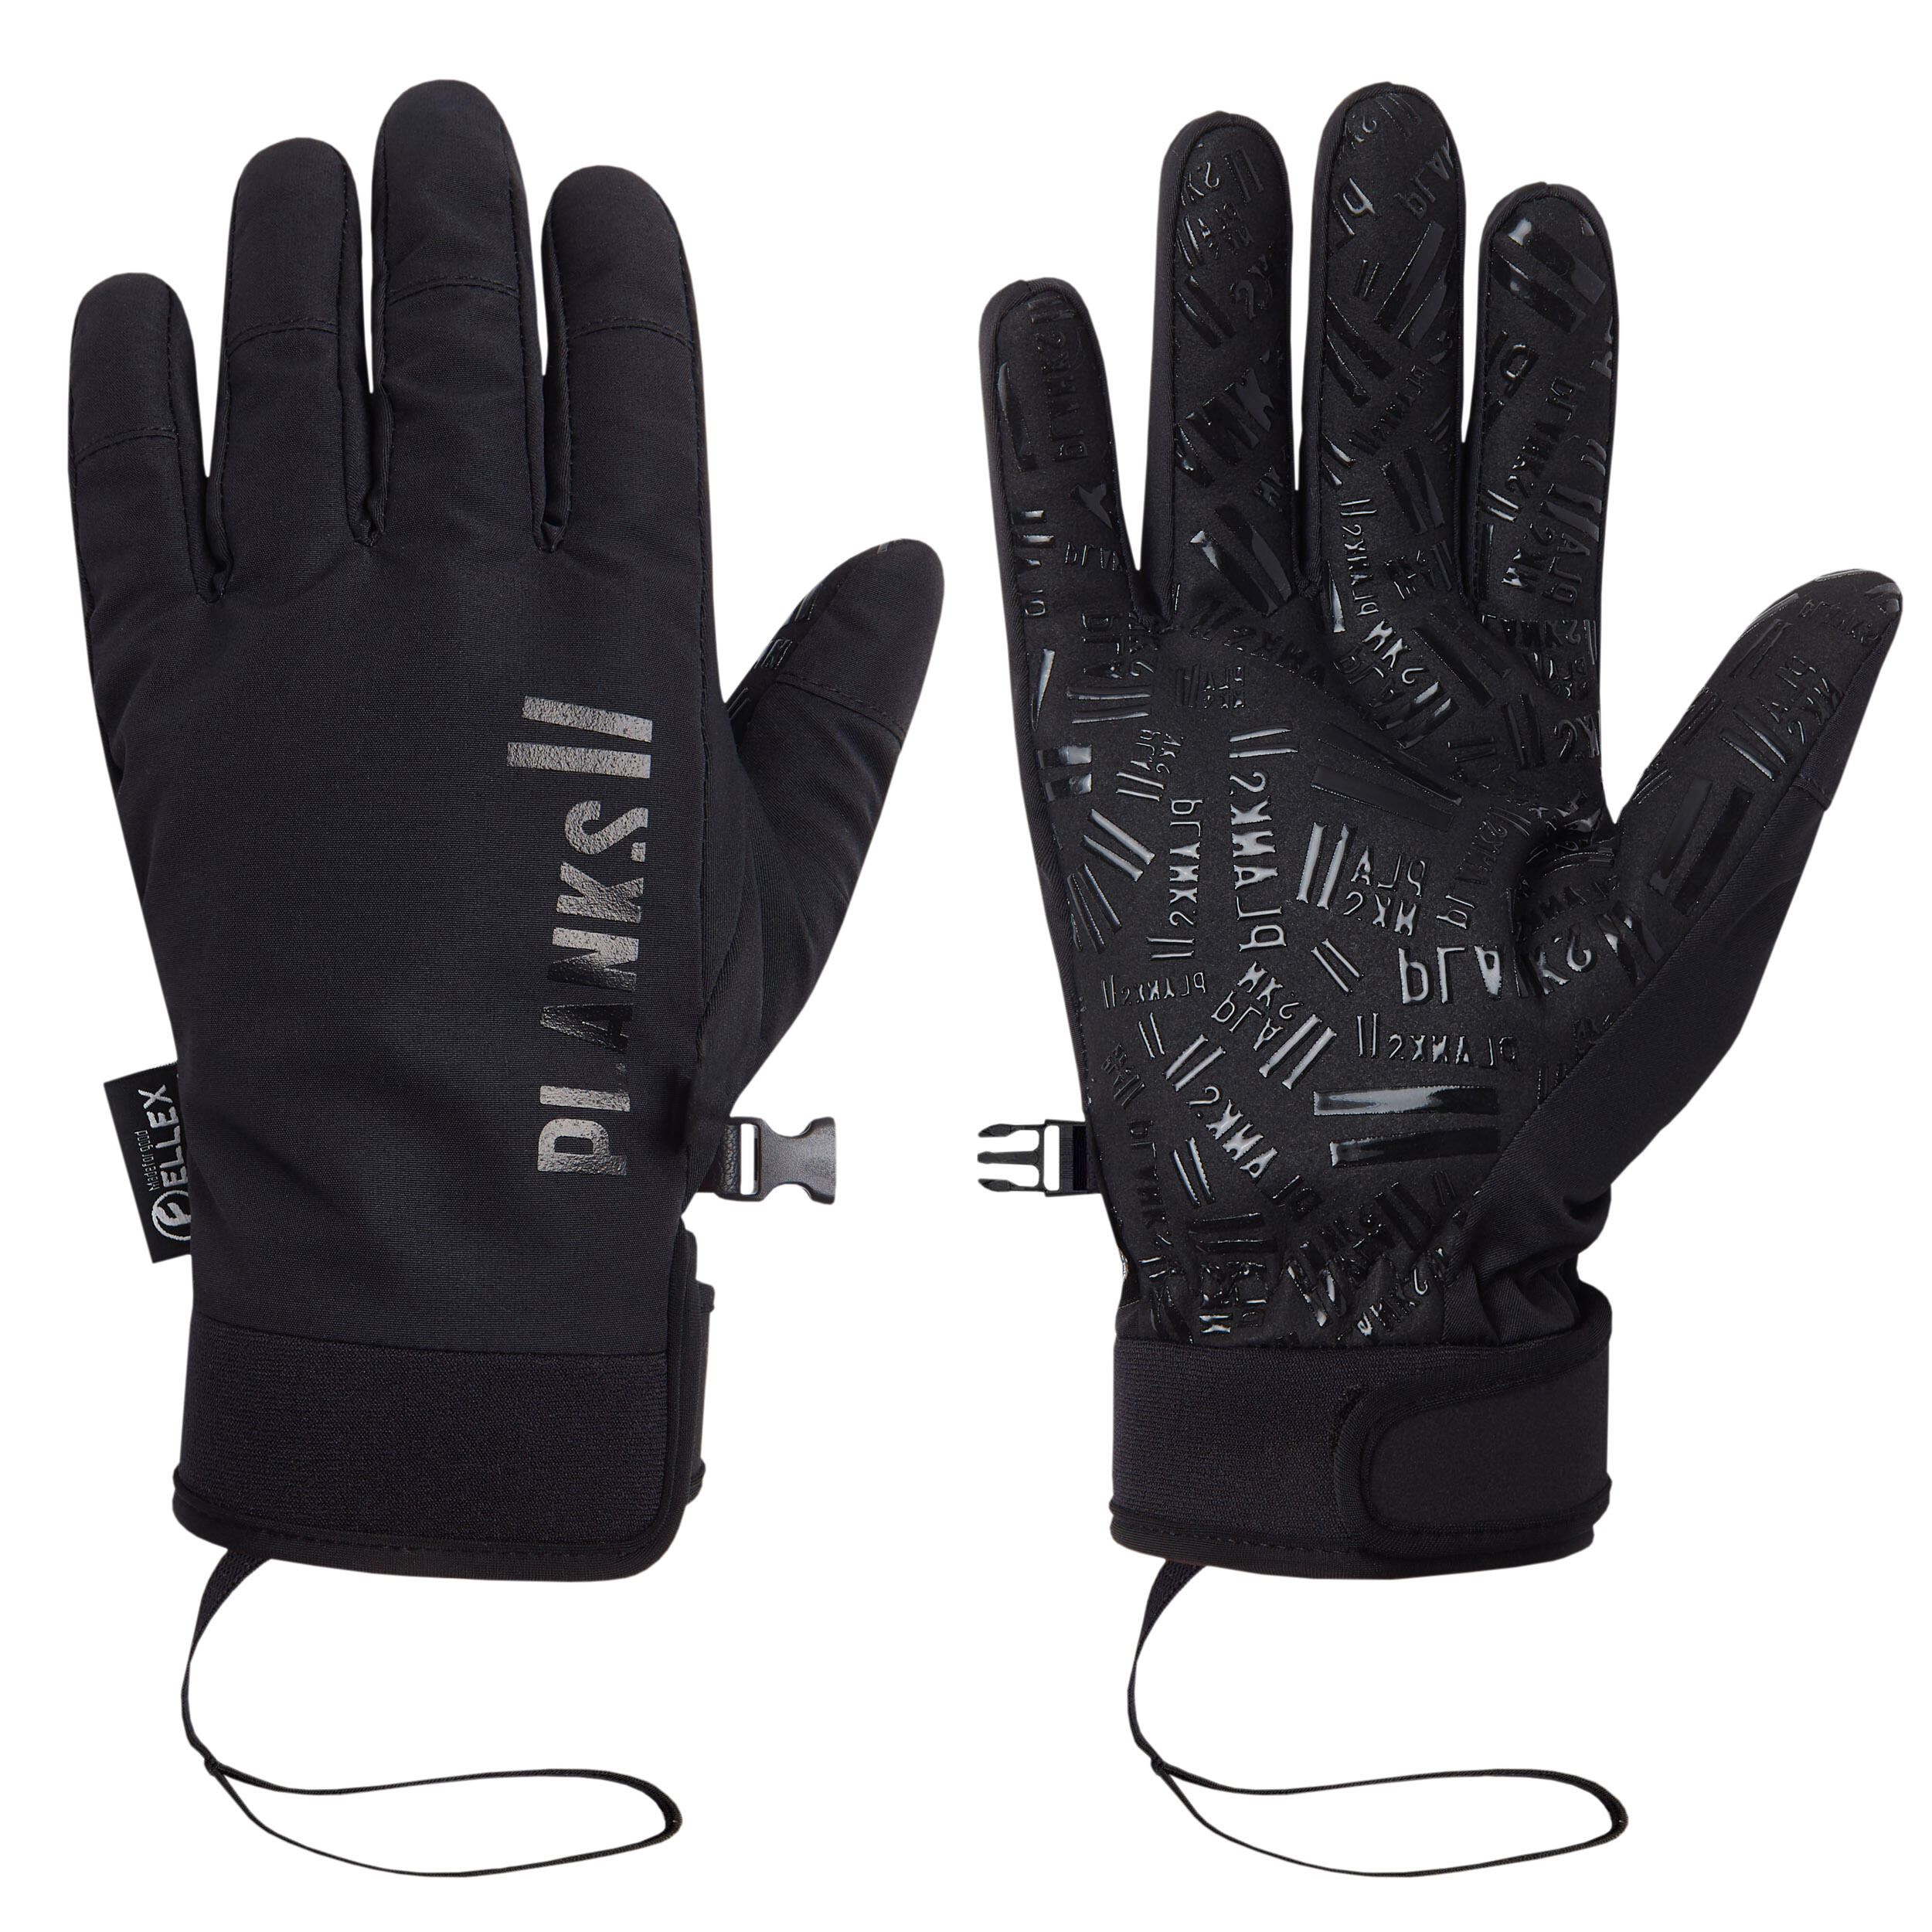 Planks High Times Unisex Insulated Pipe Ski Gloves in Black with Print Palm 1/2